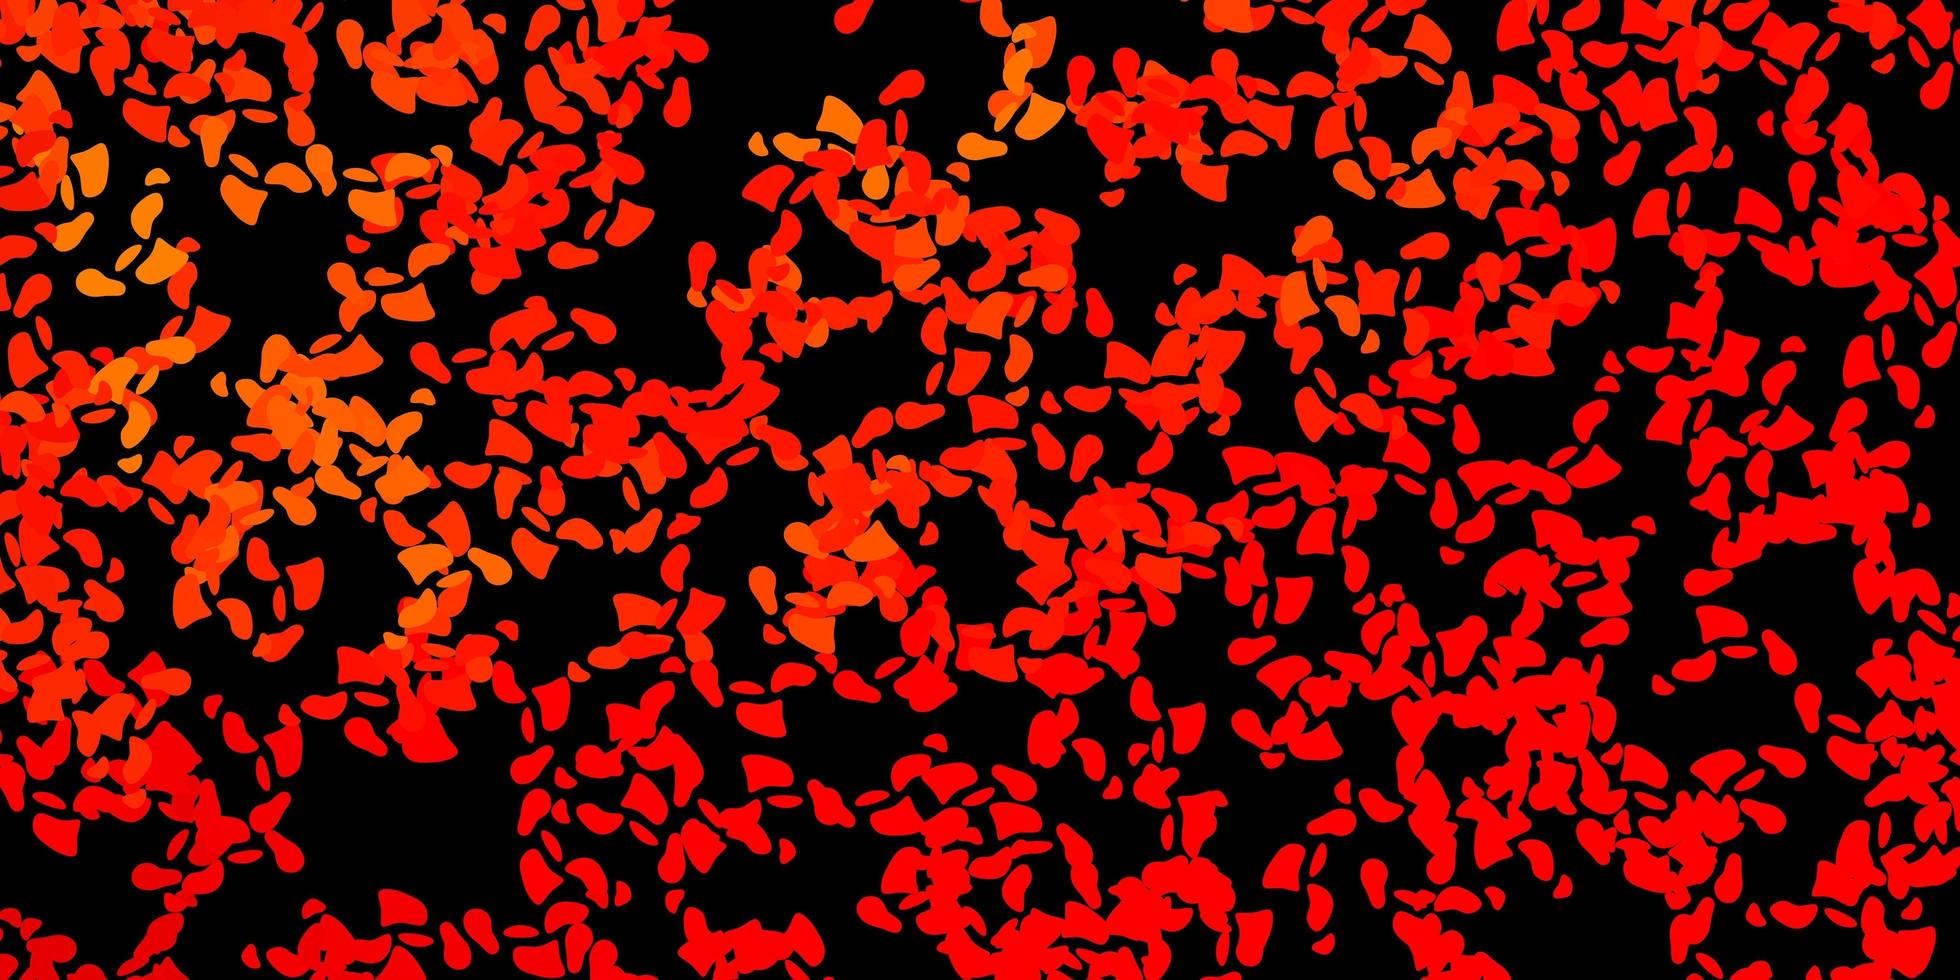 Dark orange vector pattern with abstract shapes